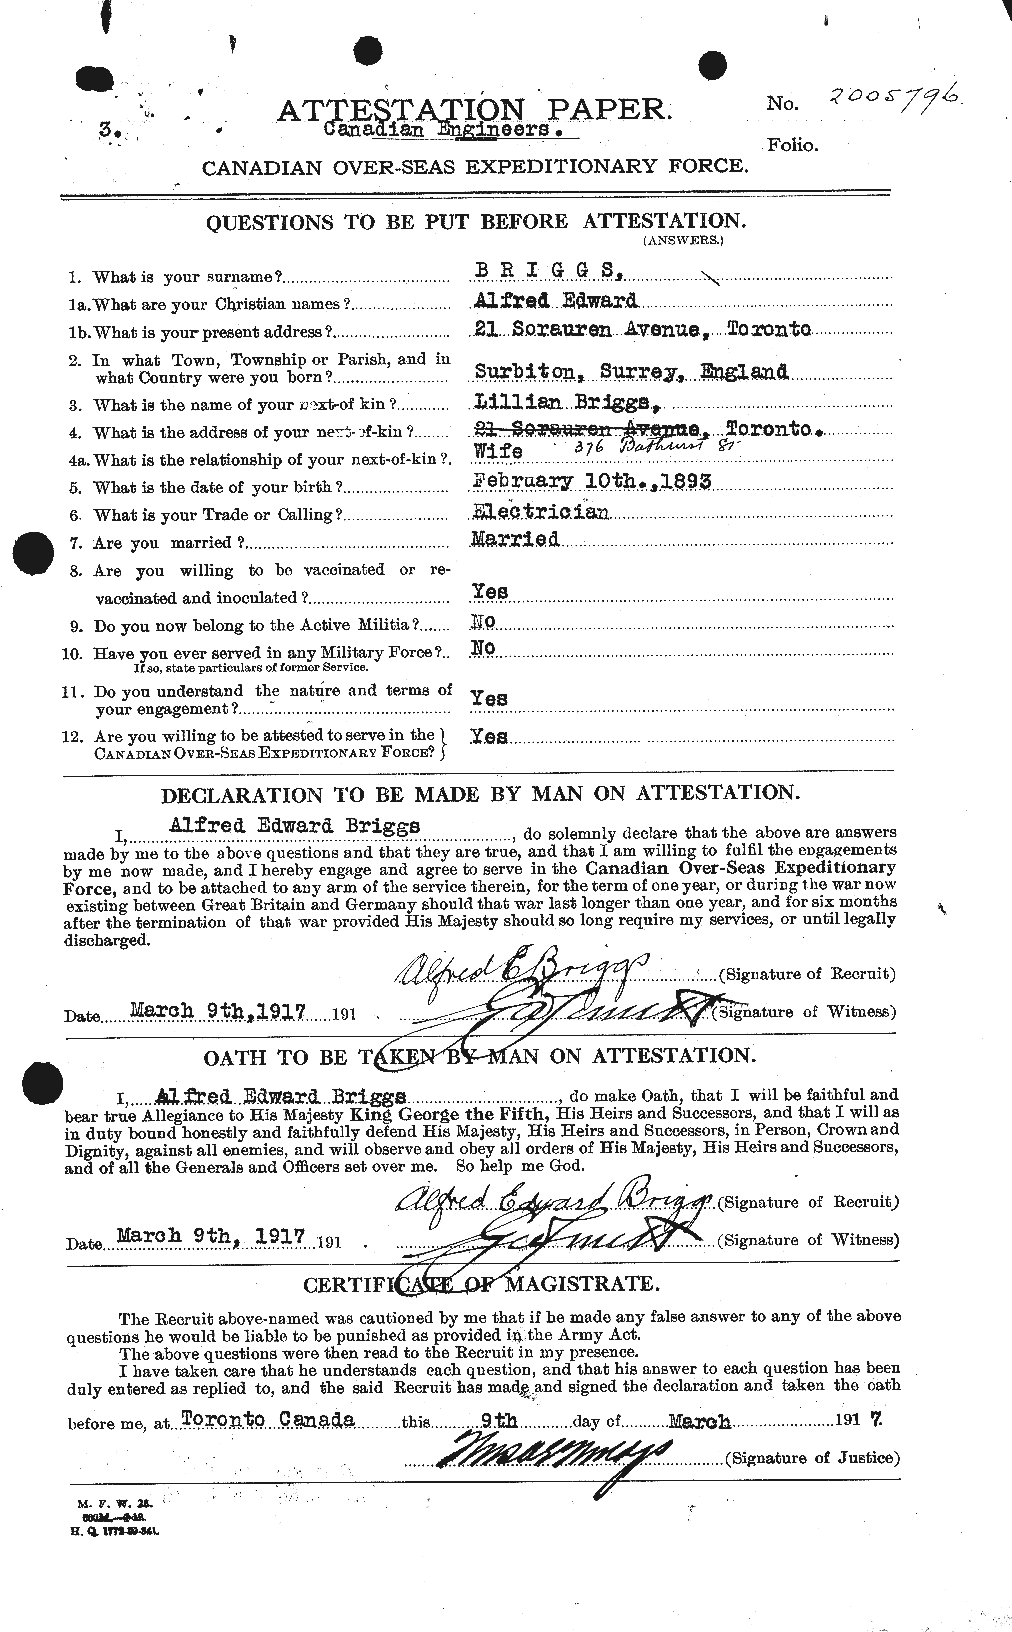 Personnel Records of the First World War - CEF 263960a